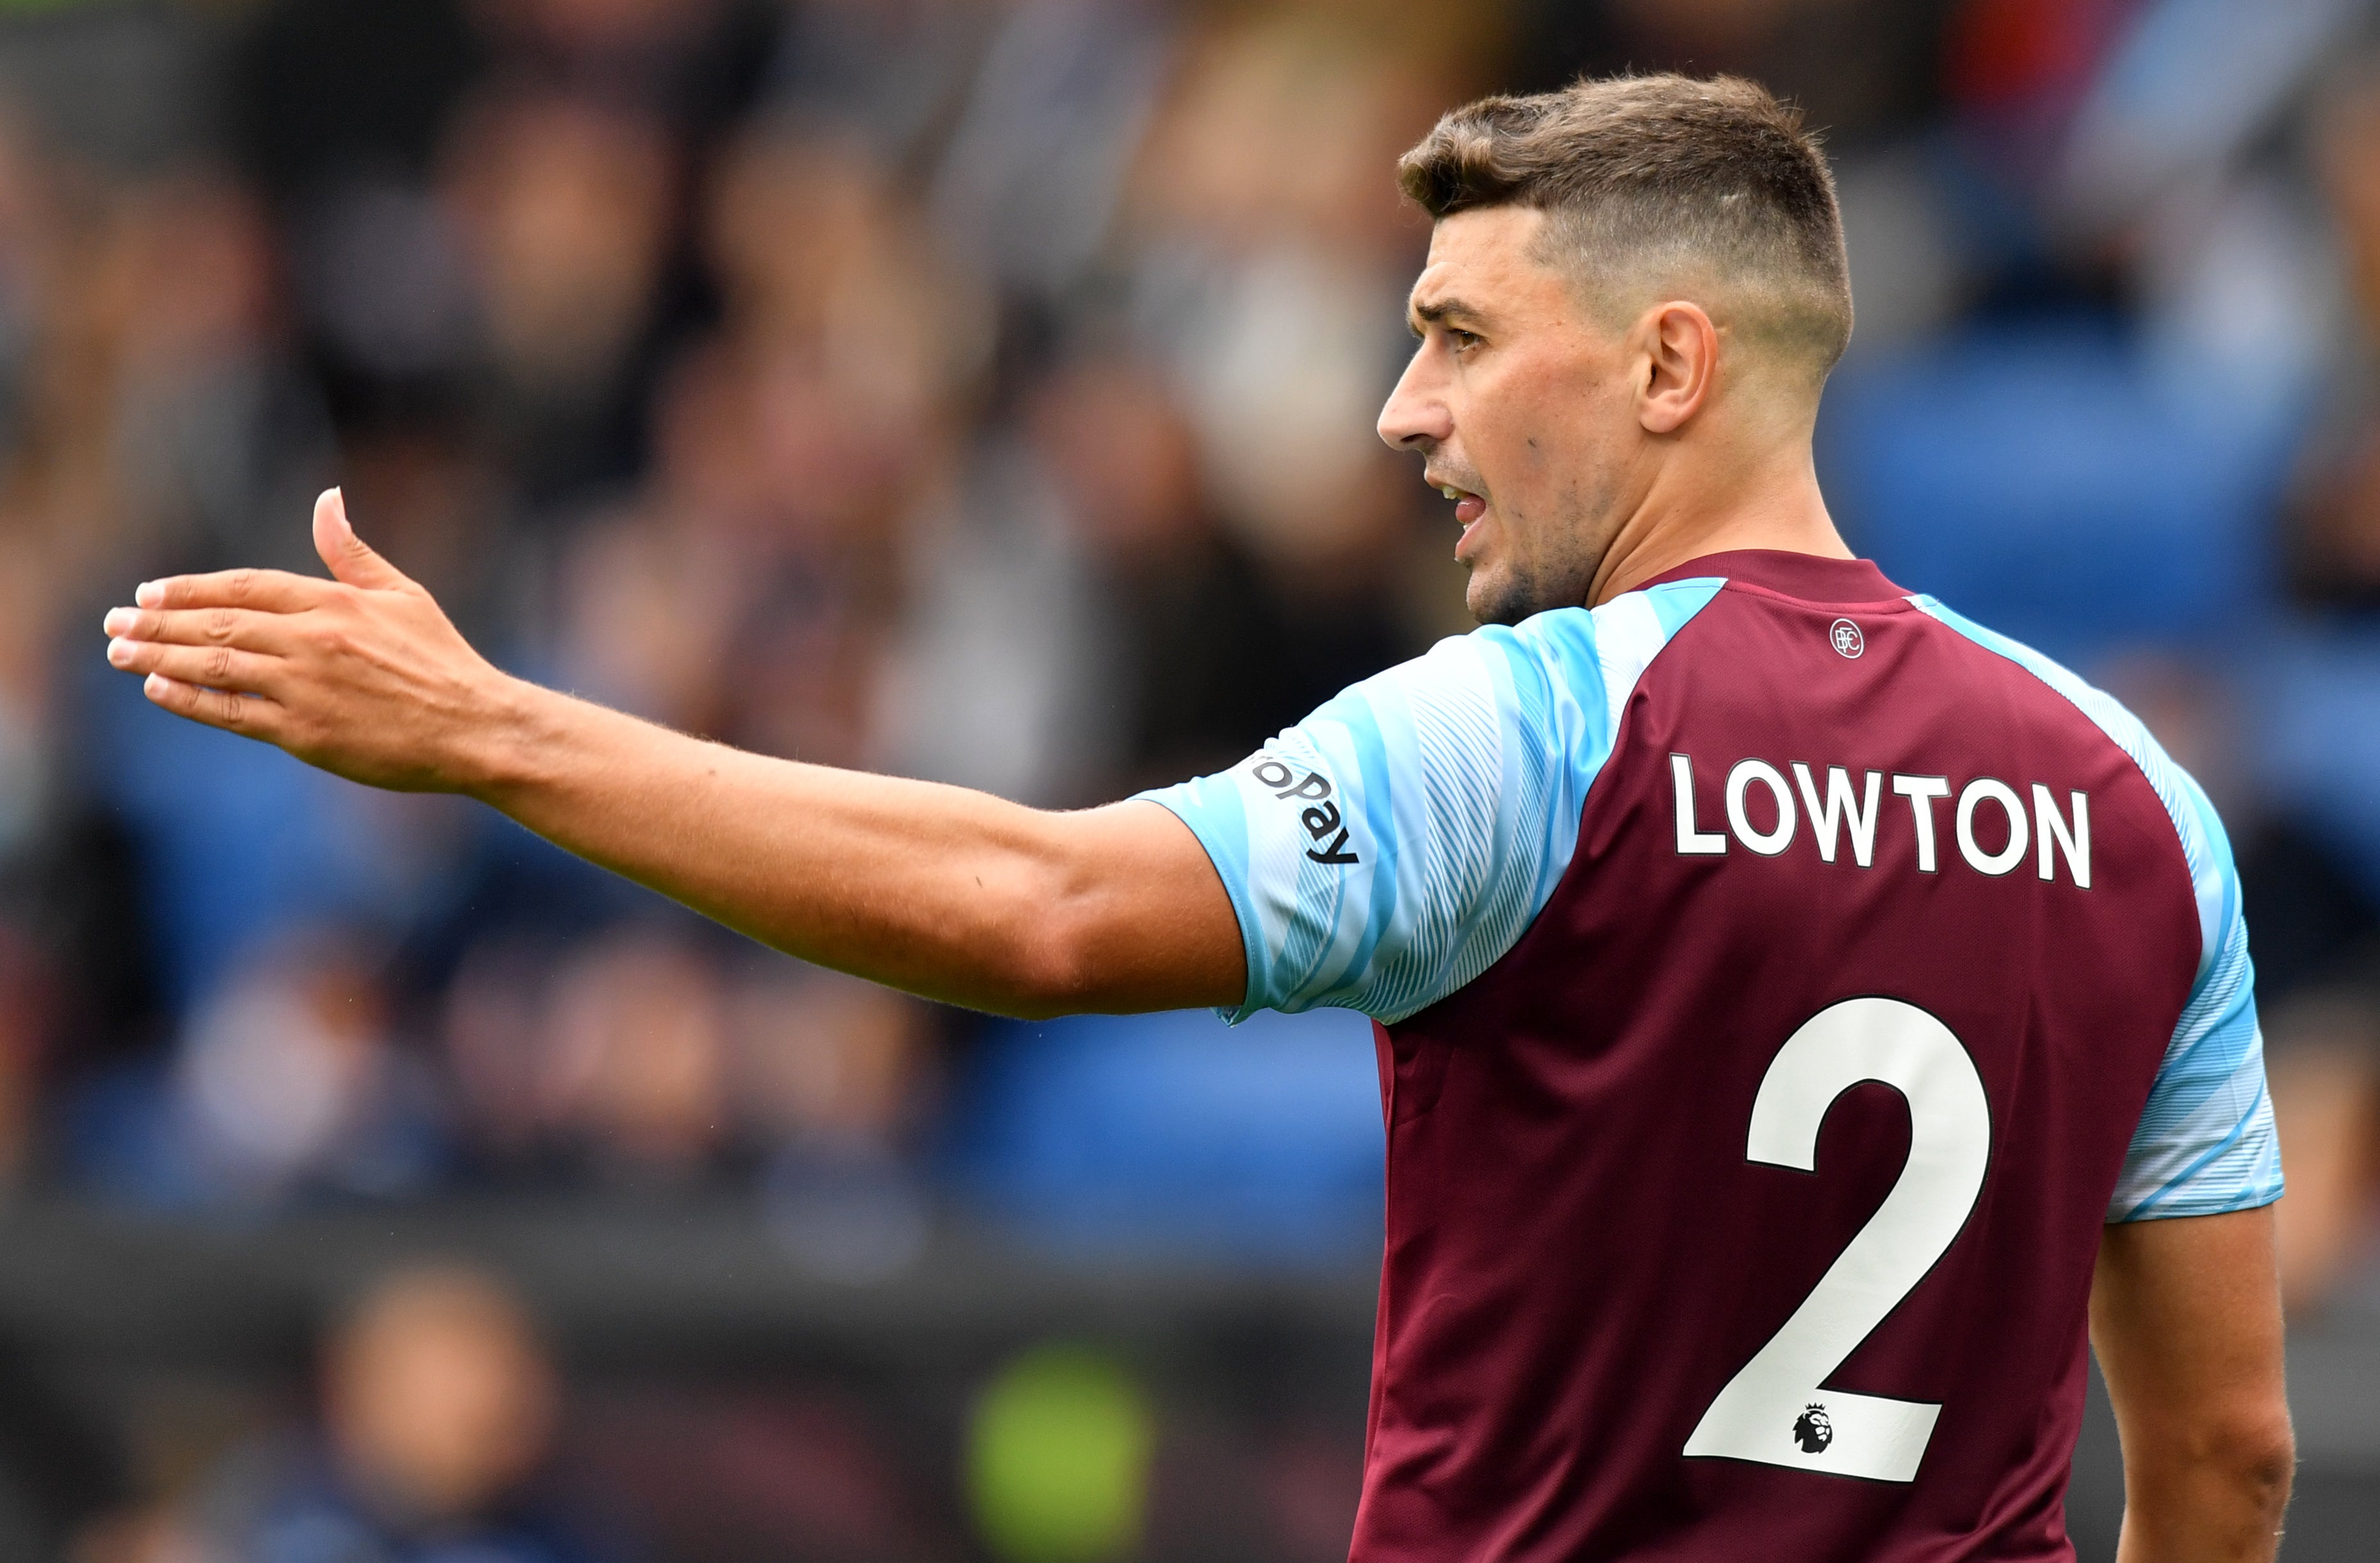 Matt Lowton believes Burnley’s fitness would help them deal with any fixture congestion (Anthony Devlin/PA)